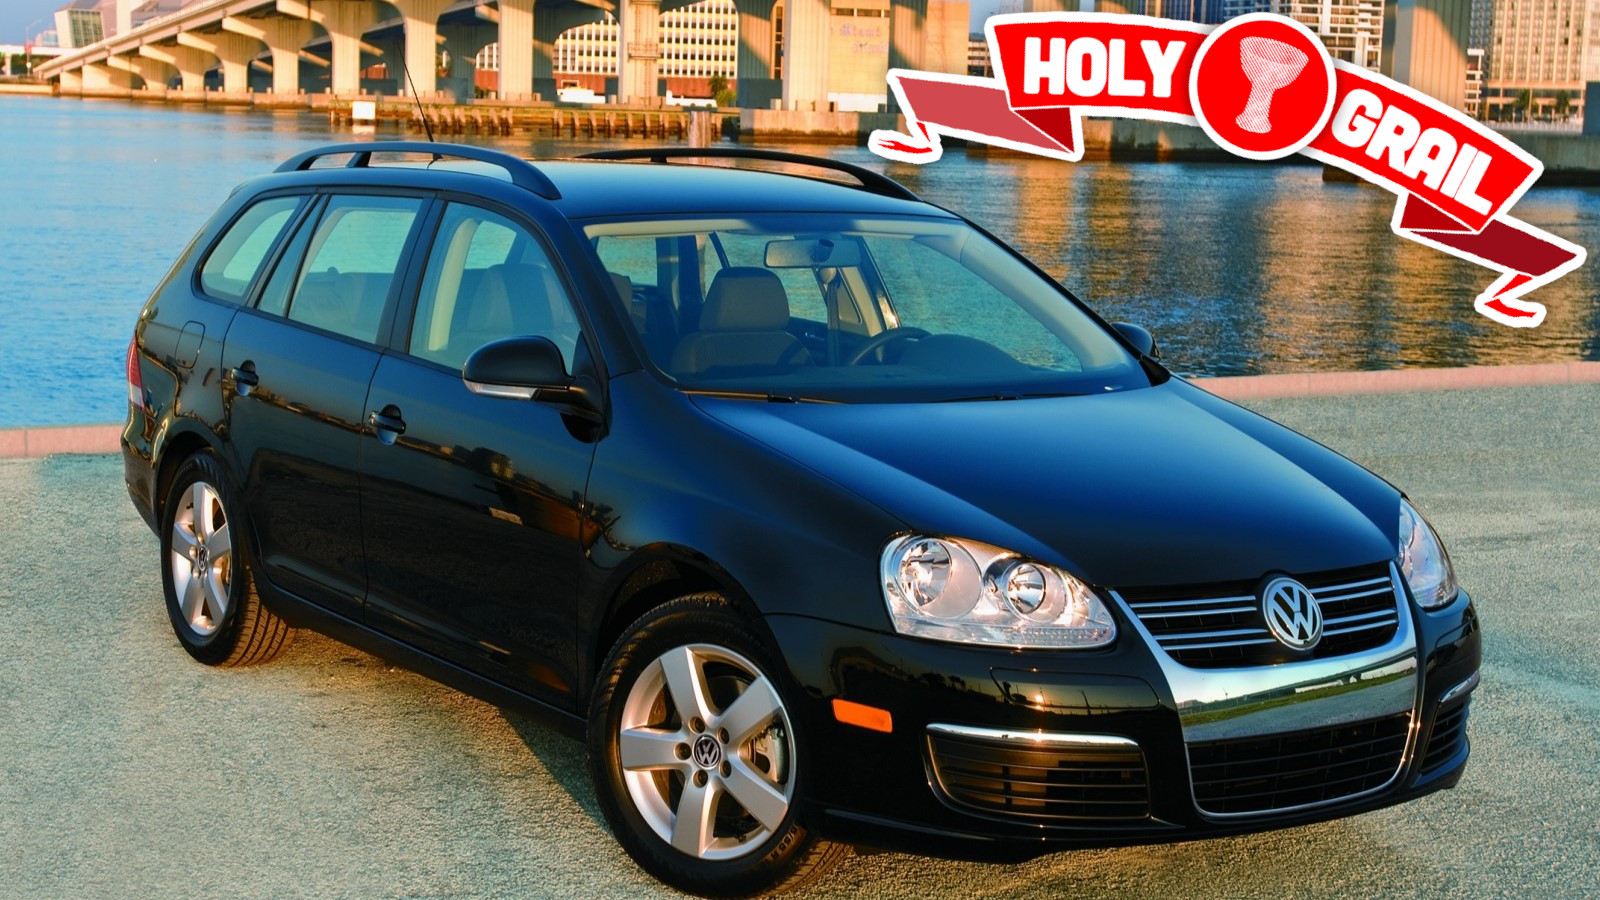 For Just A Single Year You Could Buy A Manual VW Wagon With GTI Power: Holy  Grails - The Autopian